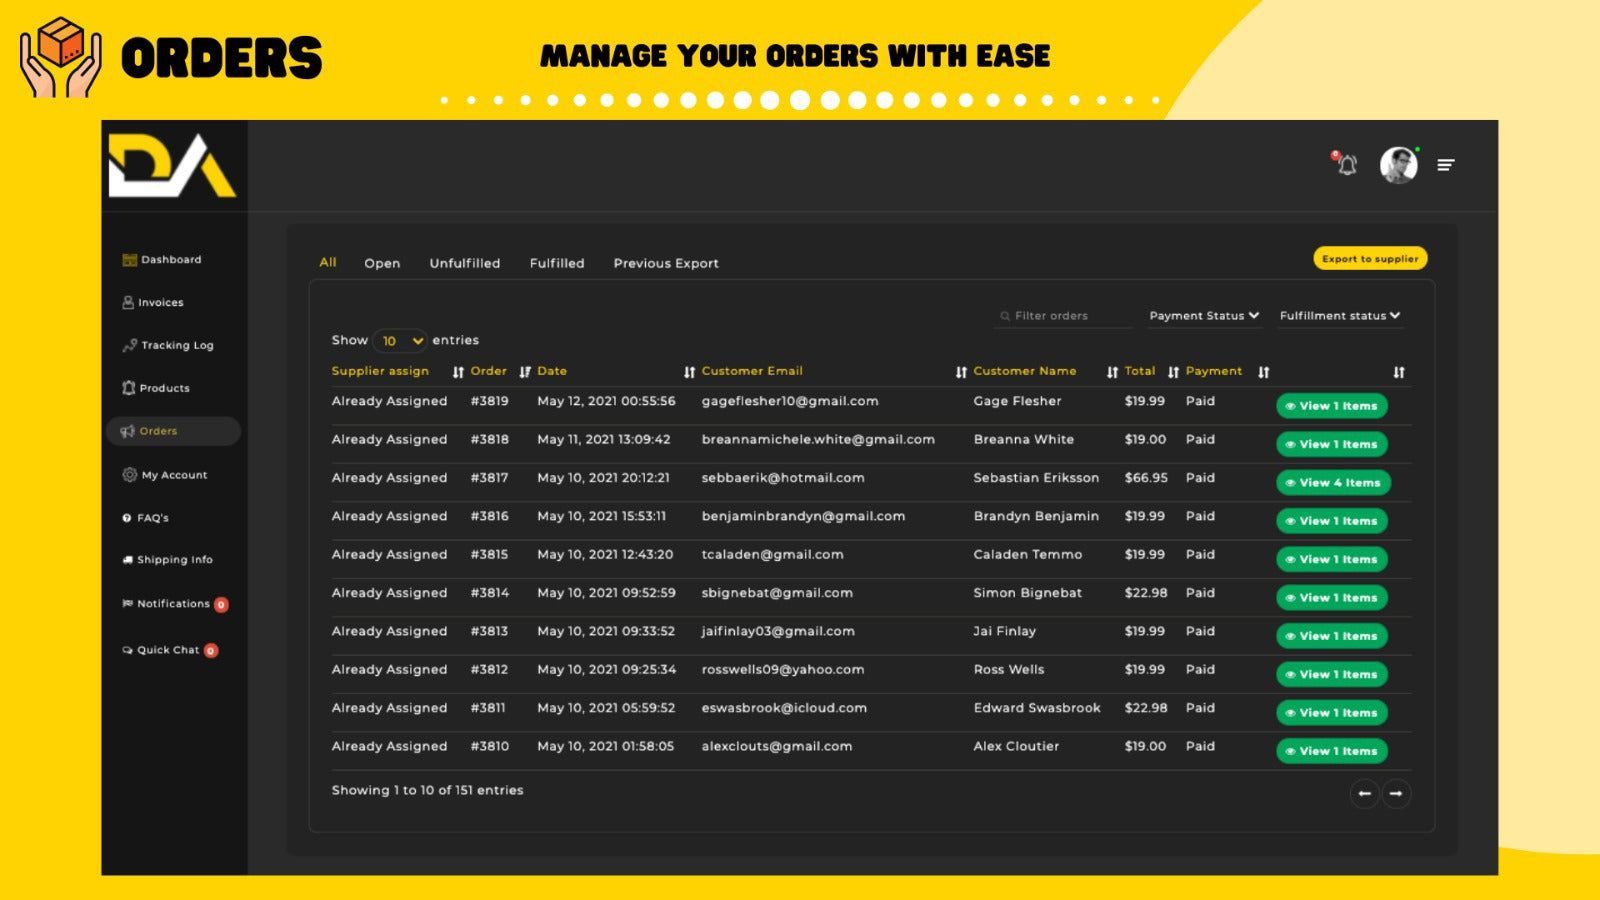 Manage Your Orders With Ease